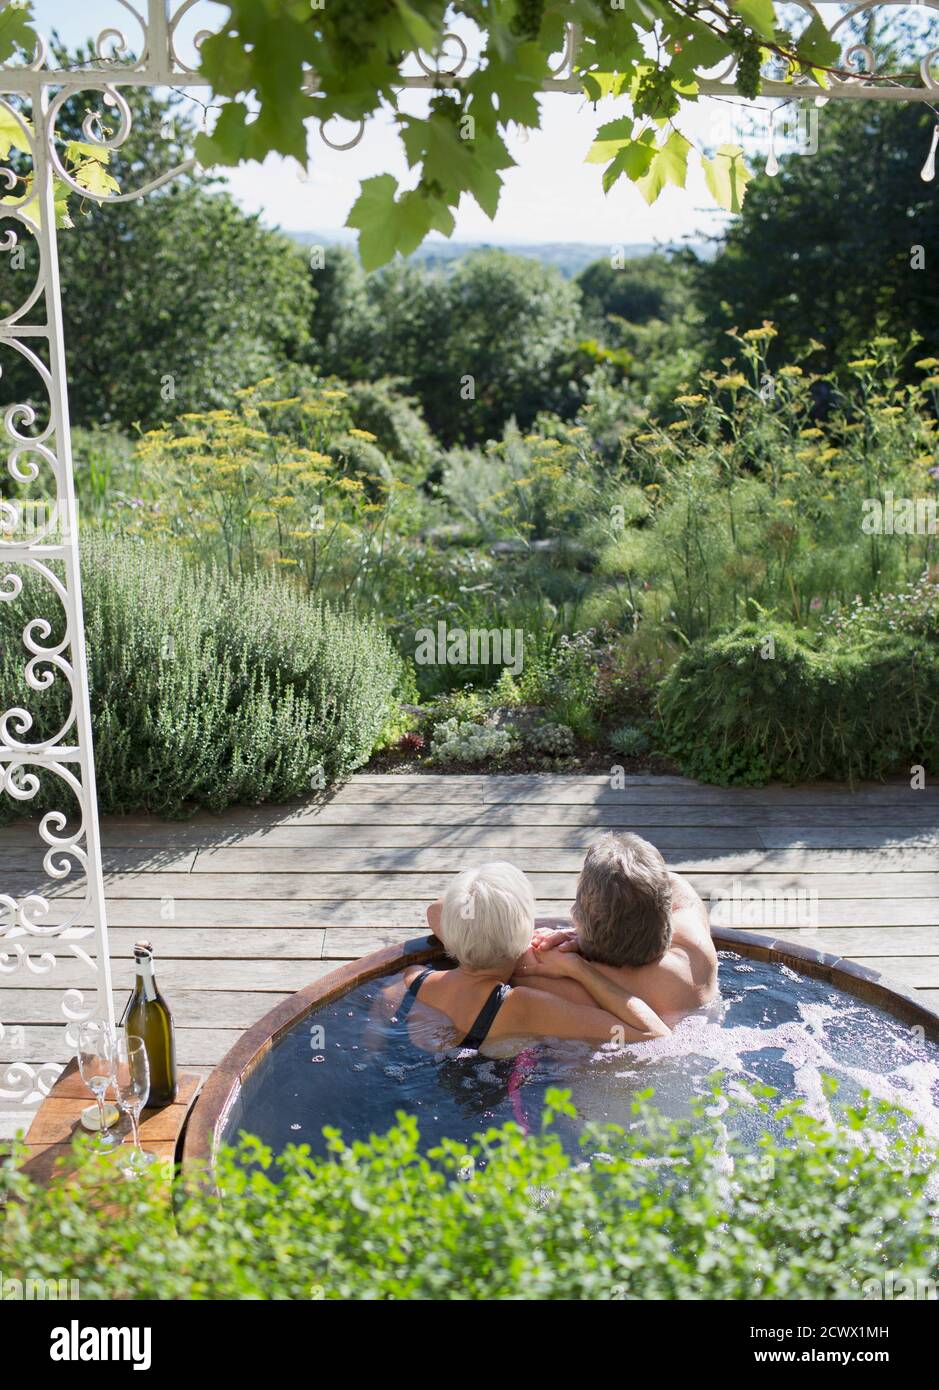 Carefree couple relaxing in hot tub on sunny summer patio Stock Photo